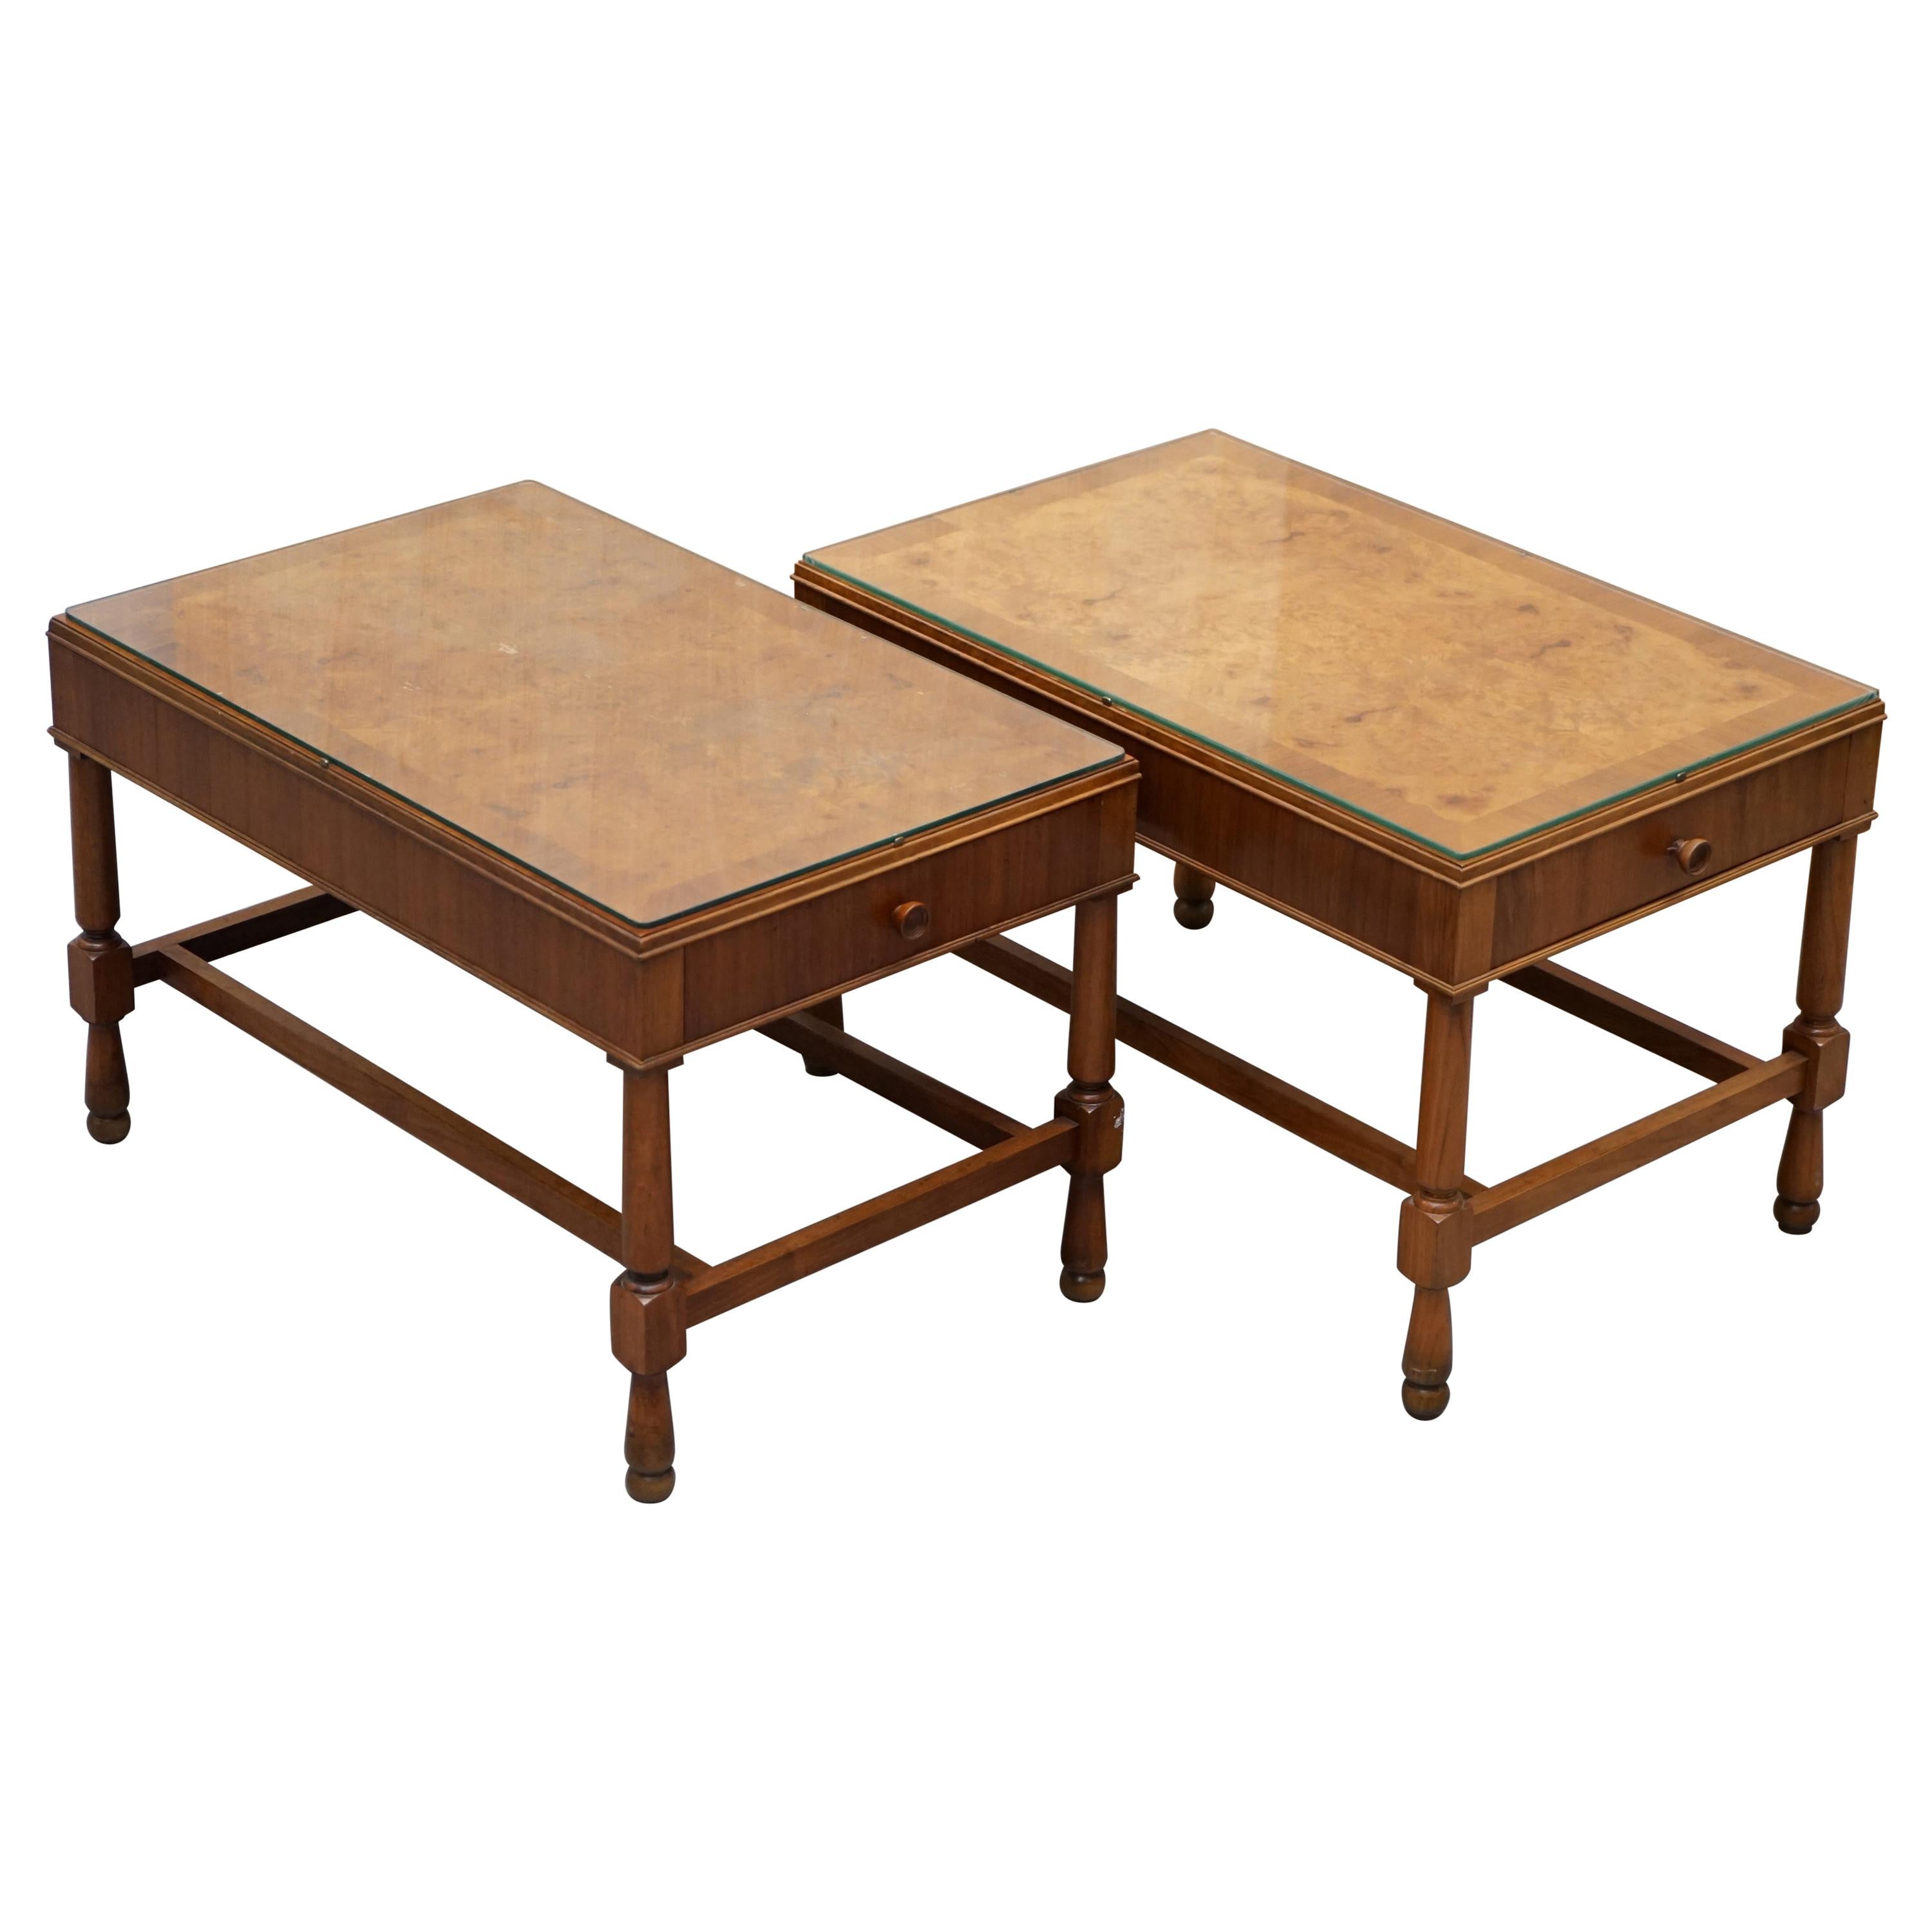 Pair of Vintage Burr Walnut Long Side Tables with Drawers Both Ends & Glass Tops